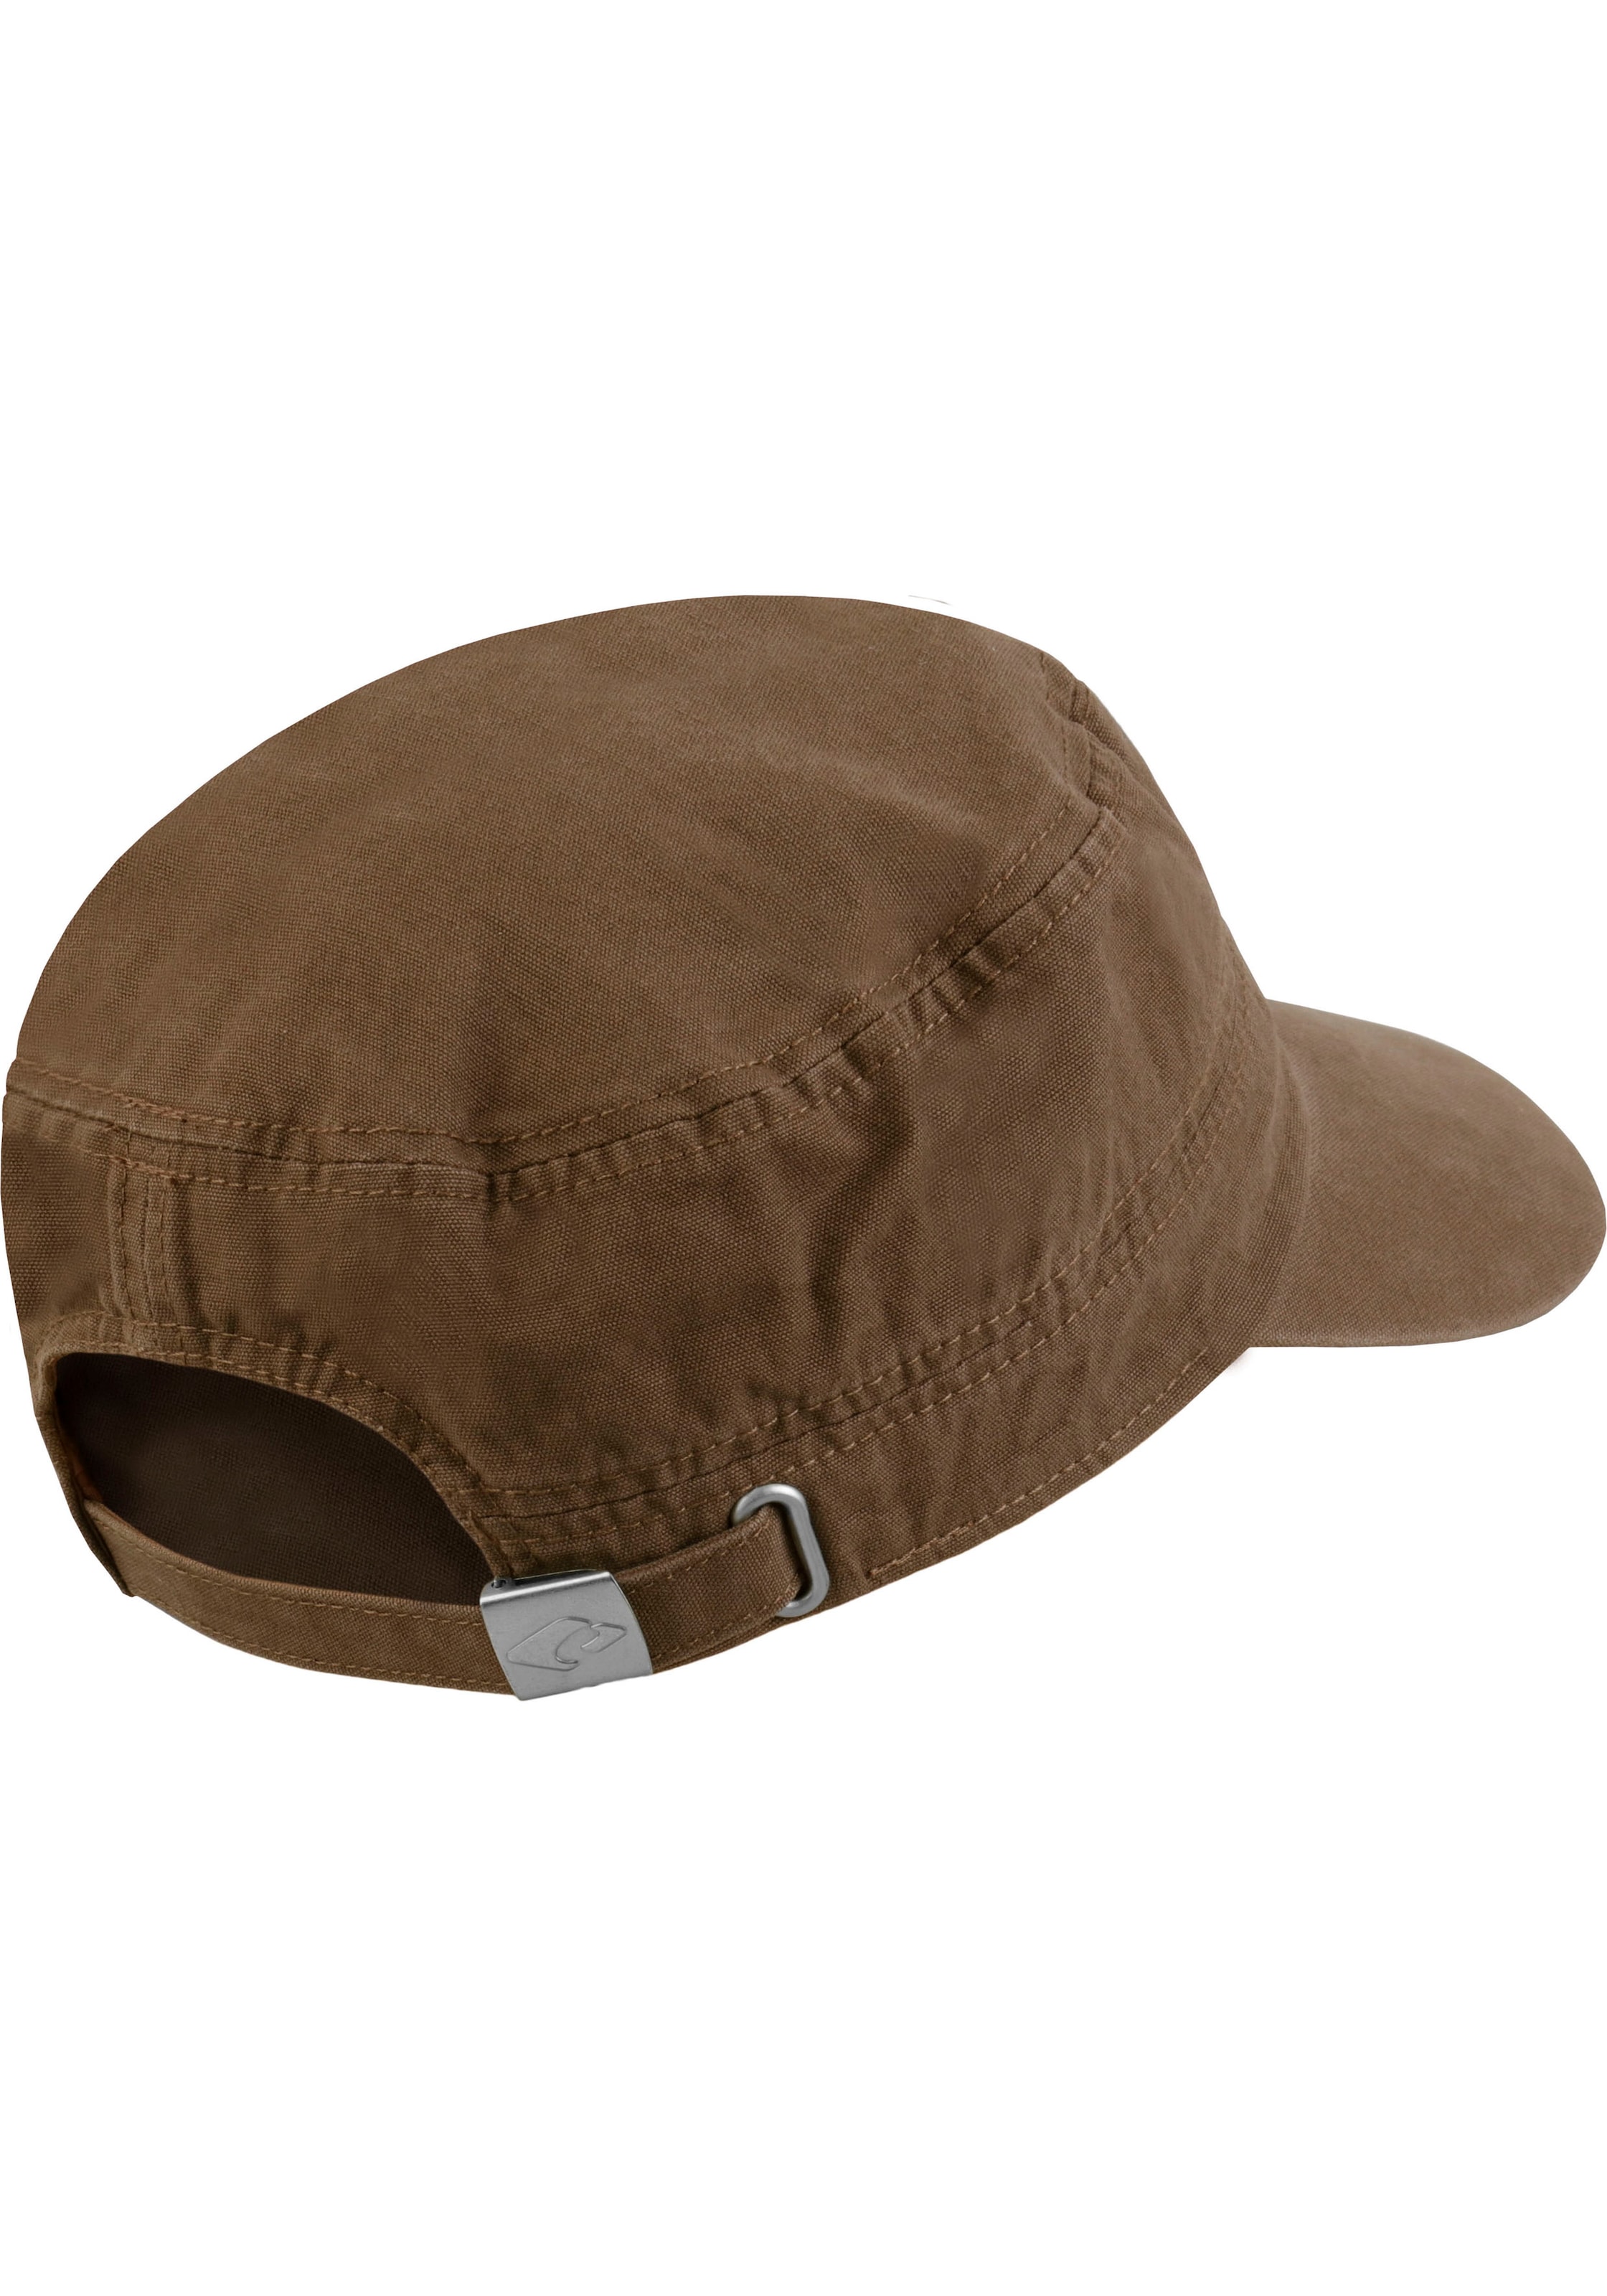 Mililtary-Style Cap Hat«, Army Cap auf chillouts »Dublin Finde im